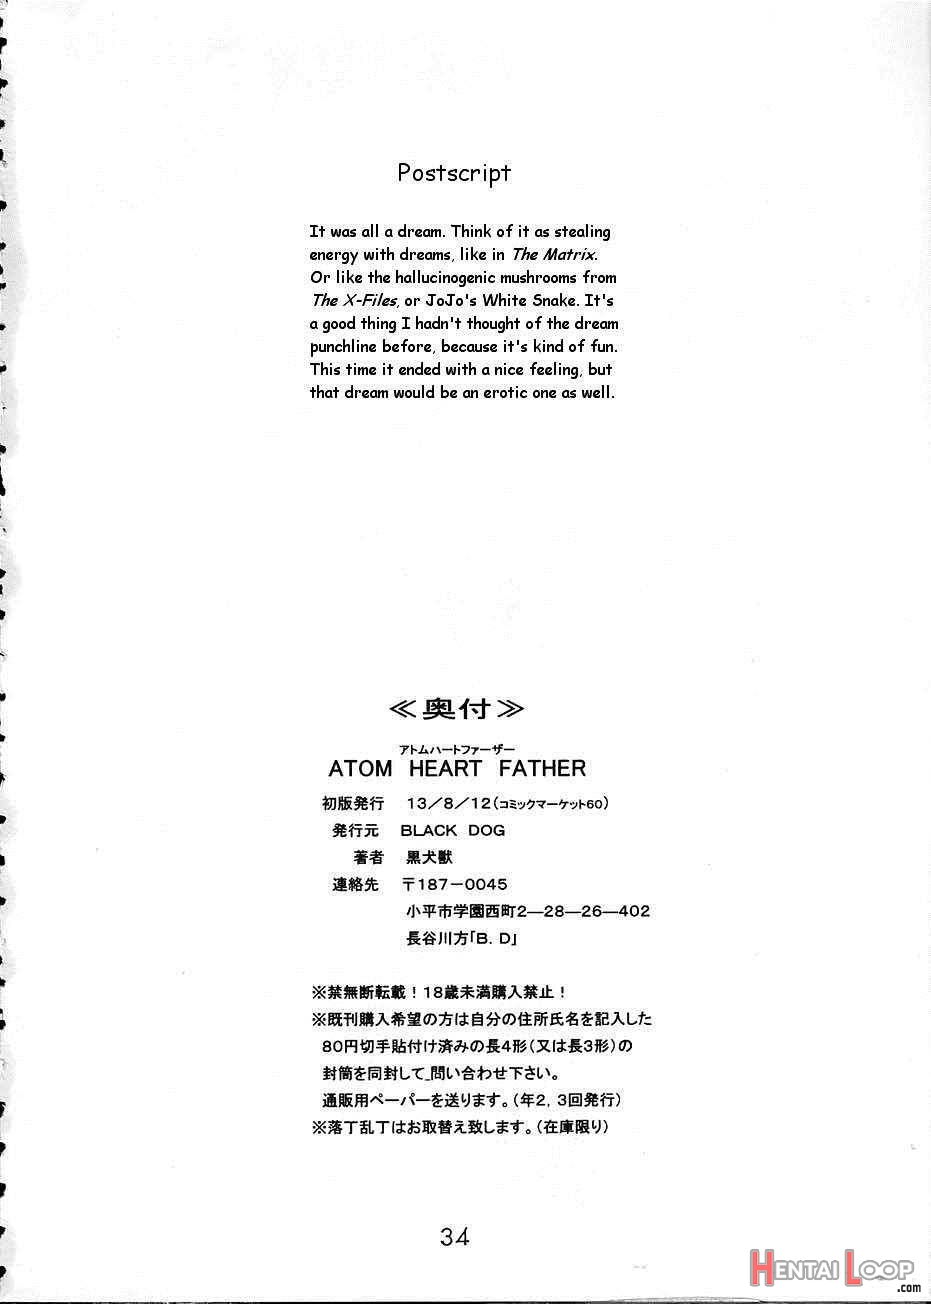 ATOM HEART FATHER page 32